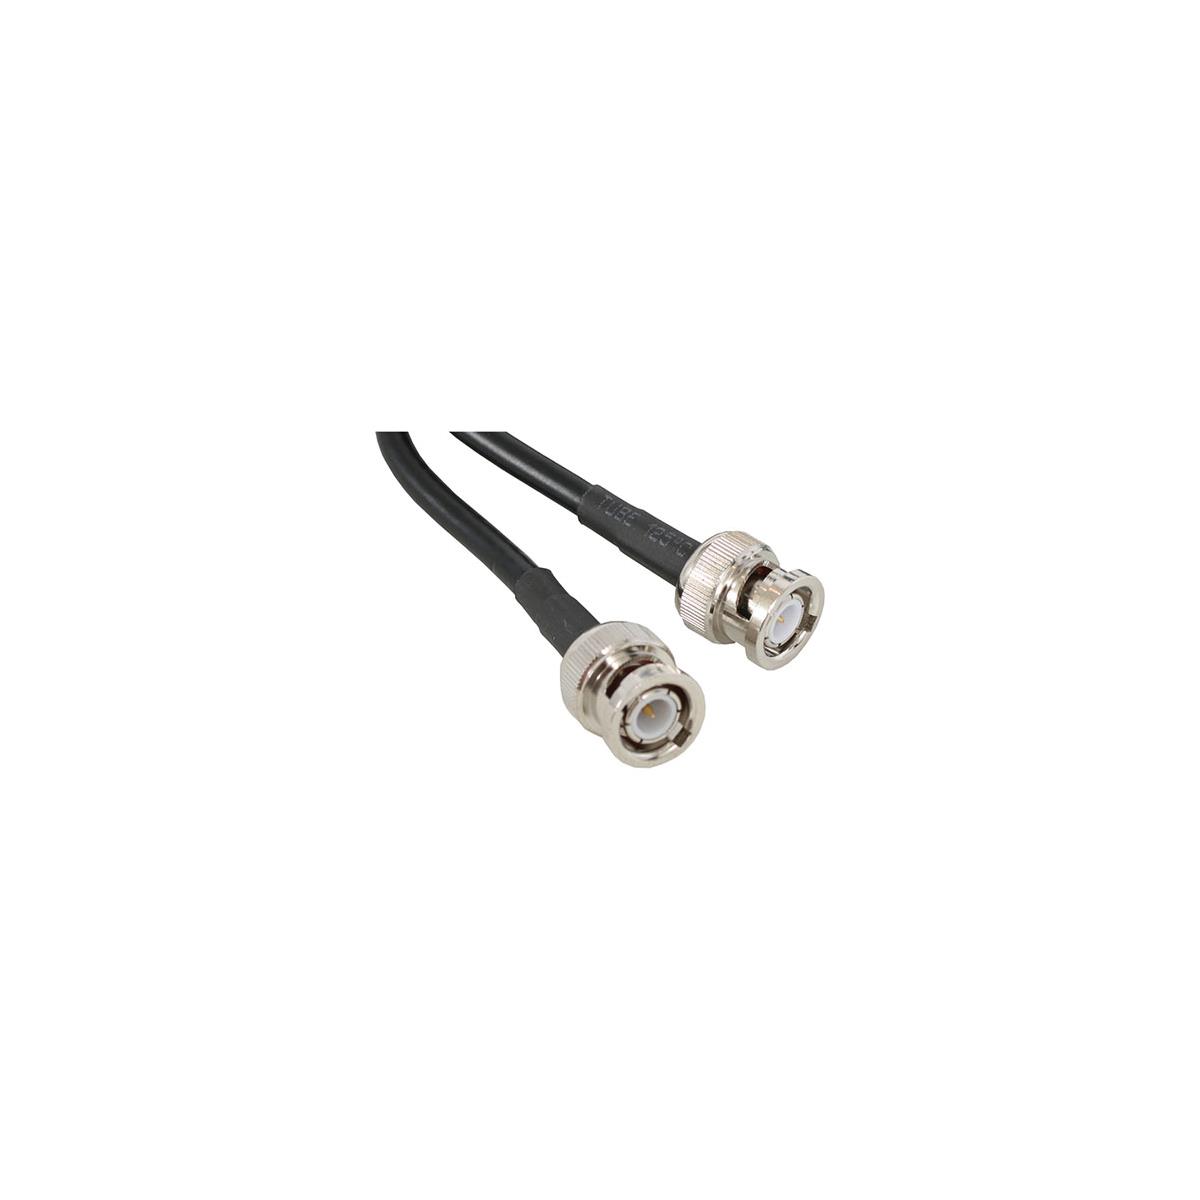 Image of Galaxy Audio 100' BNC Extension Cable for Front Mounting Antenna